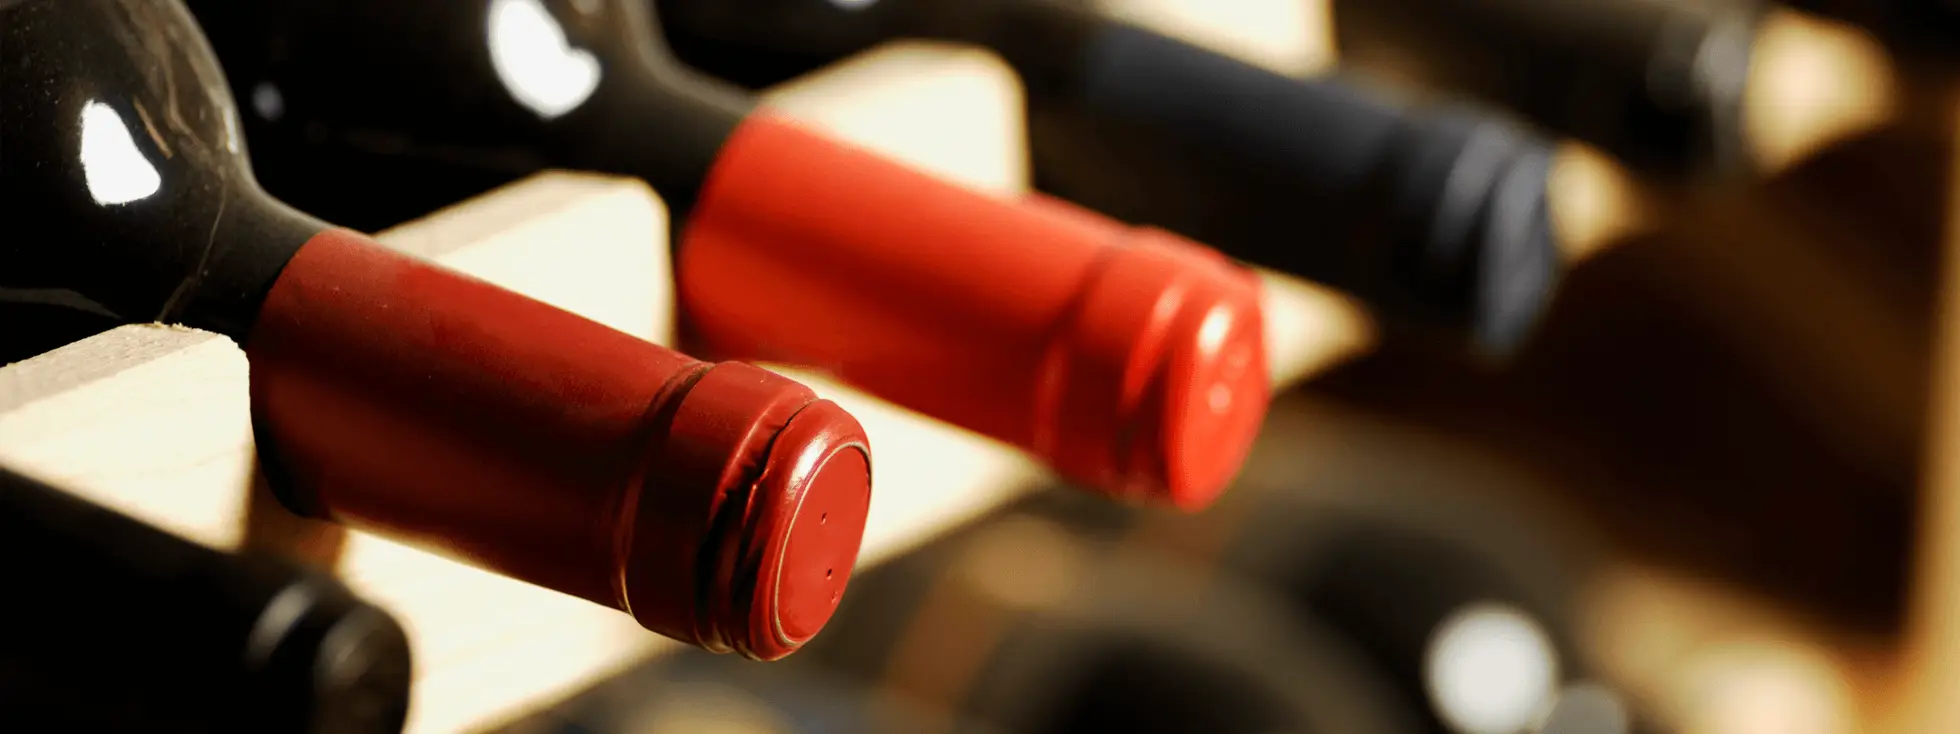 Does wine go bad? How to tell and how to prevent it.